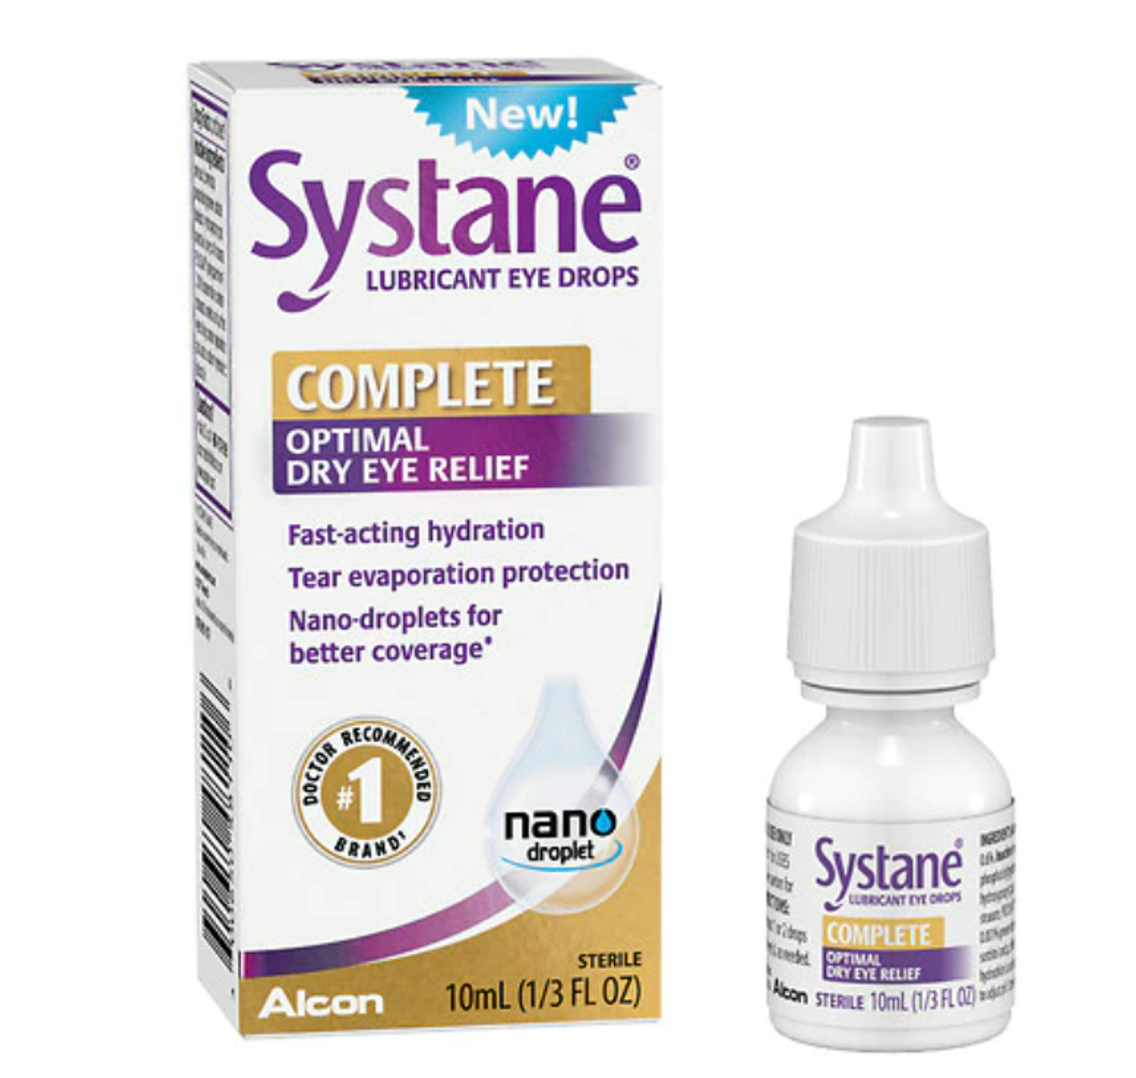 Daily OTC Pearl: Systane